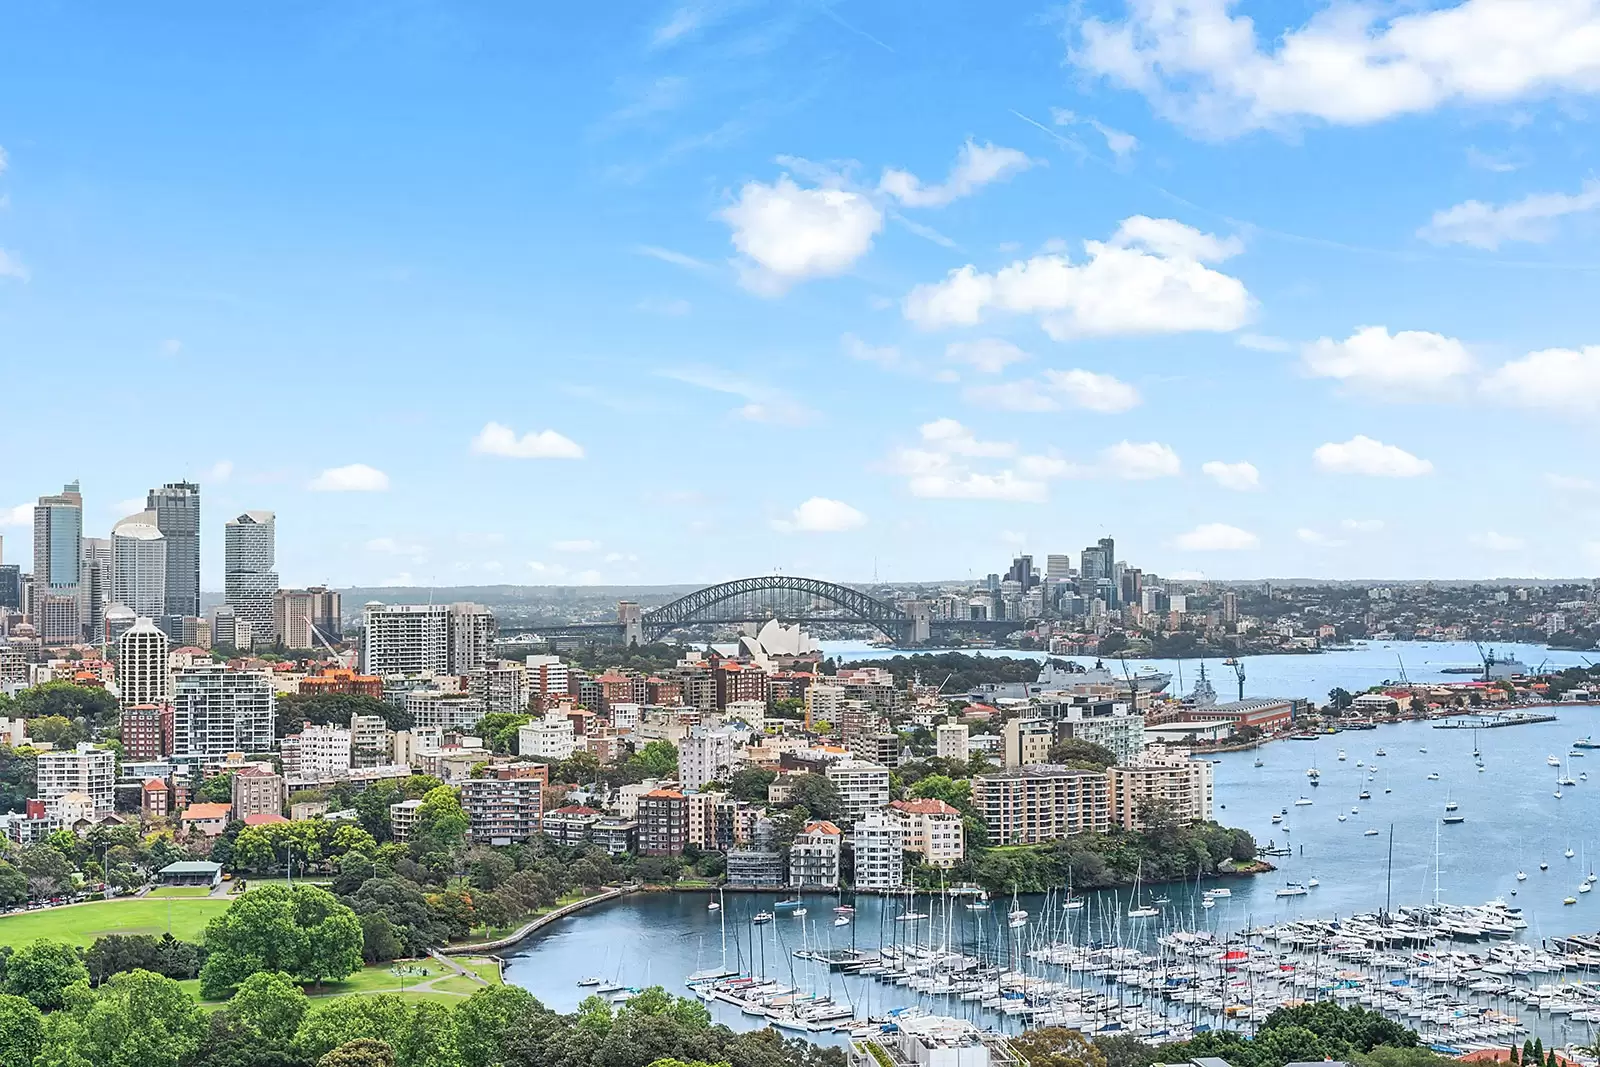 Photo #15: 24A/3 Darling Point Road, Darling Point - Sold by Sydney Sotheby's International Realty